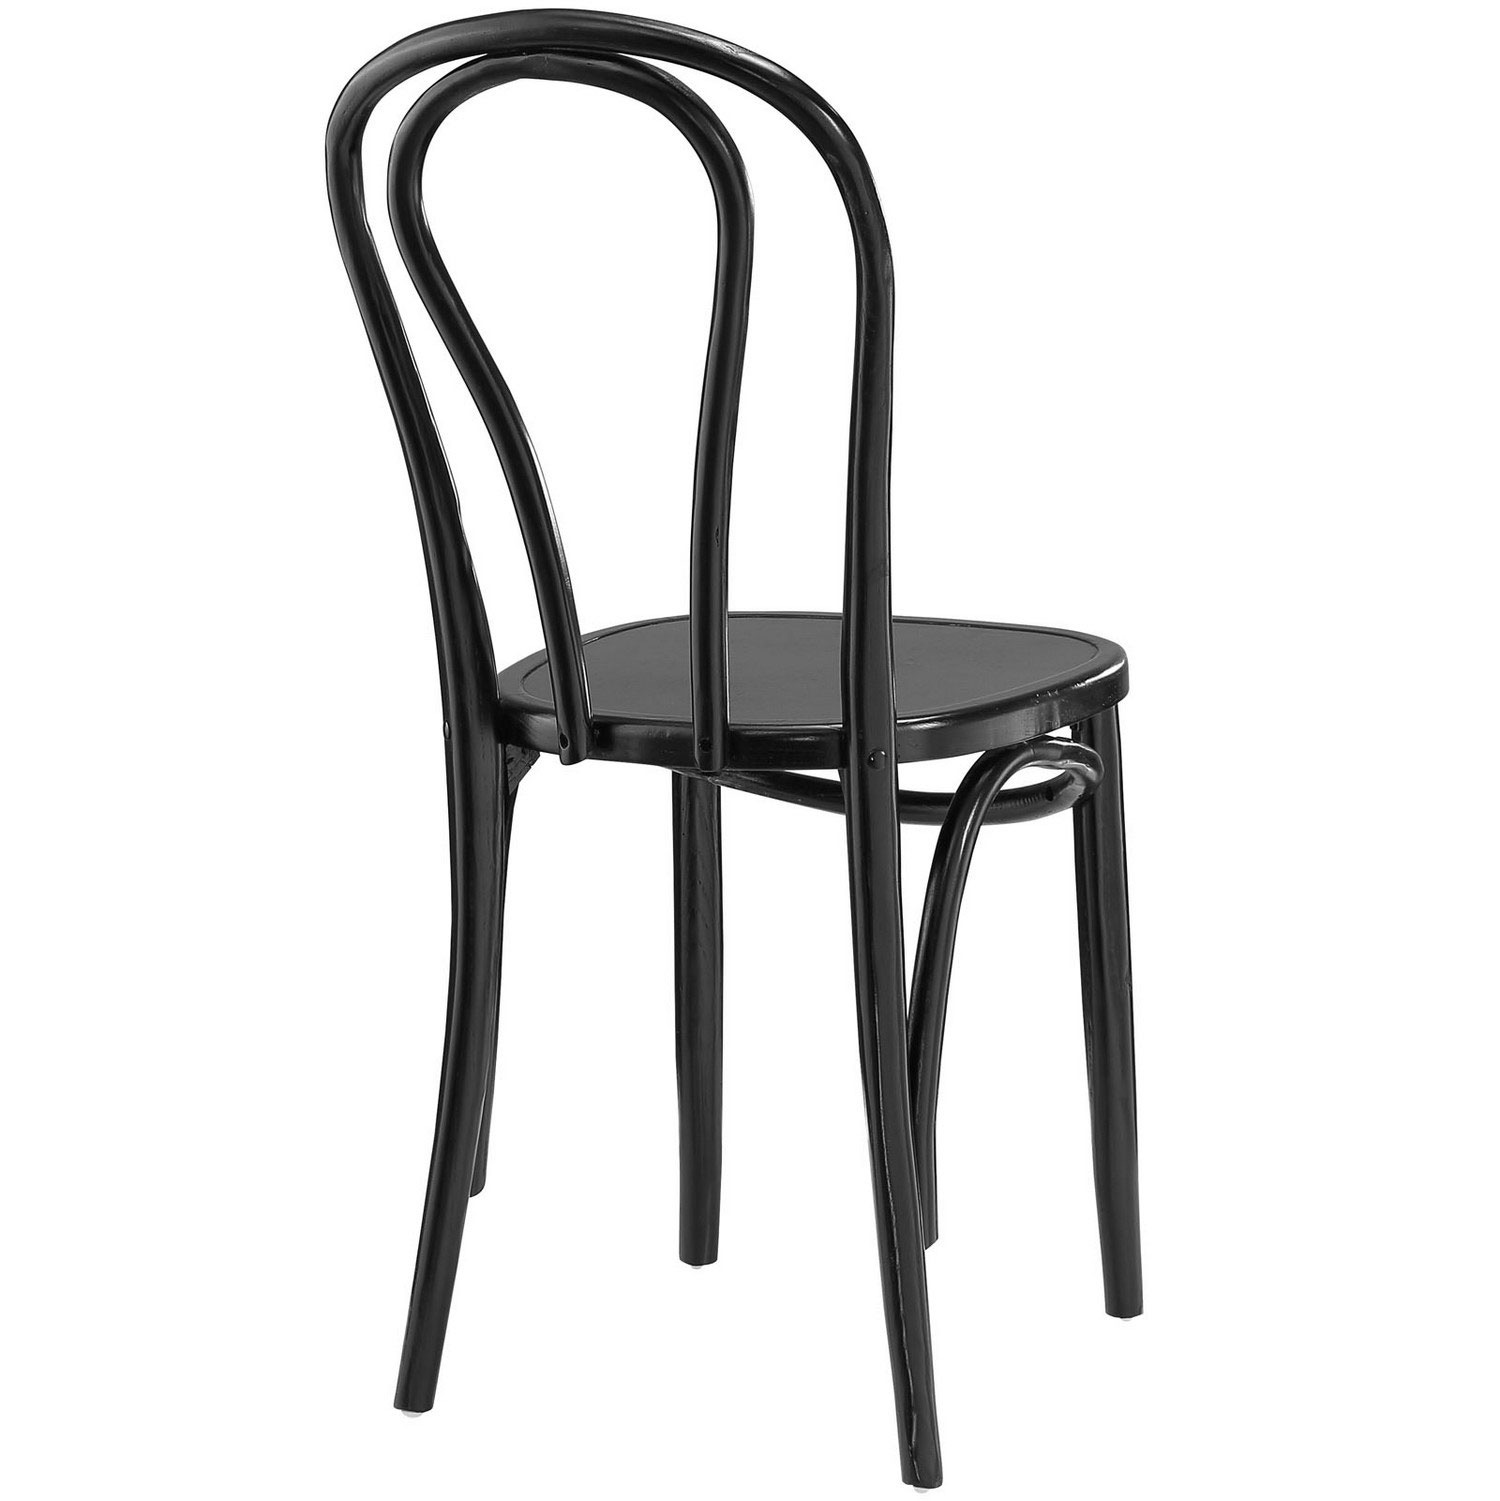 Modway Eon Dining Side Chair - Black